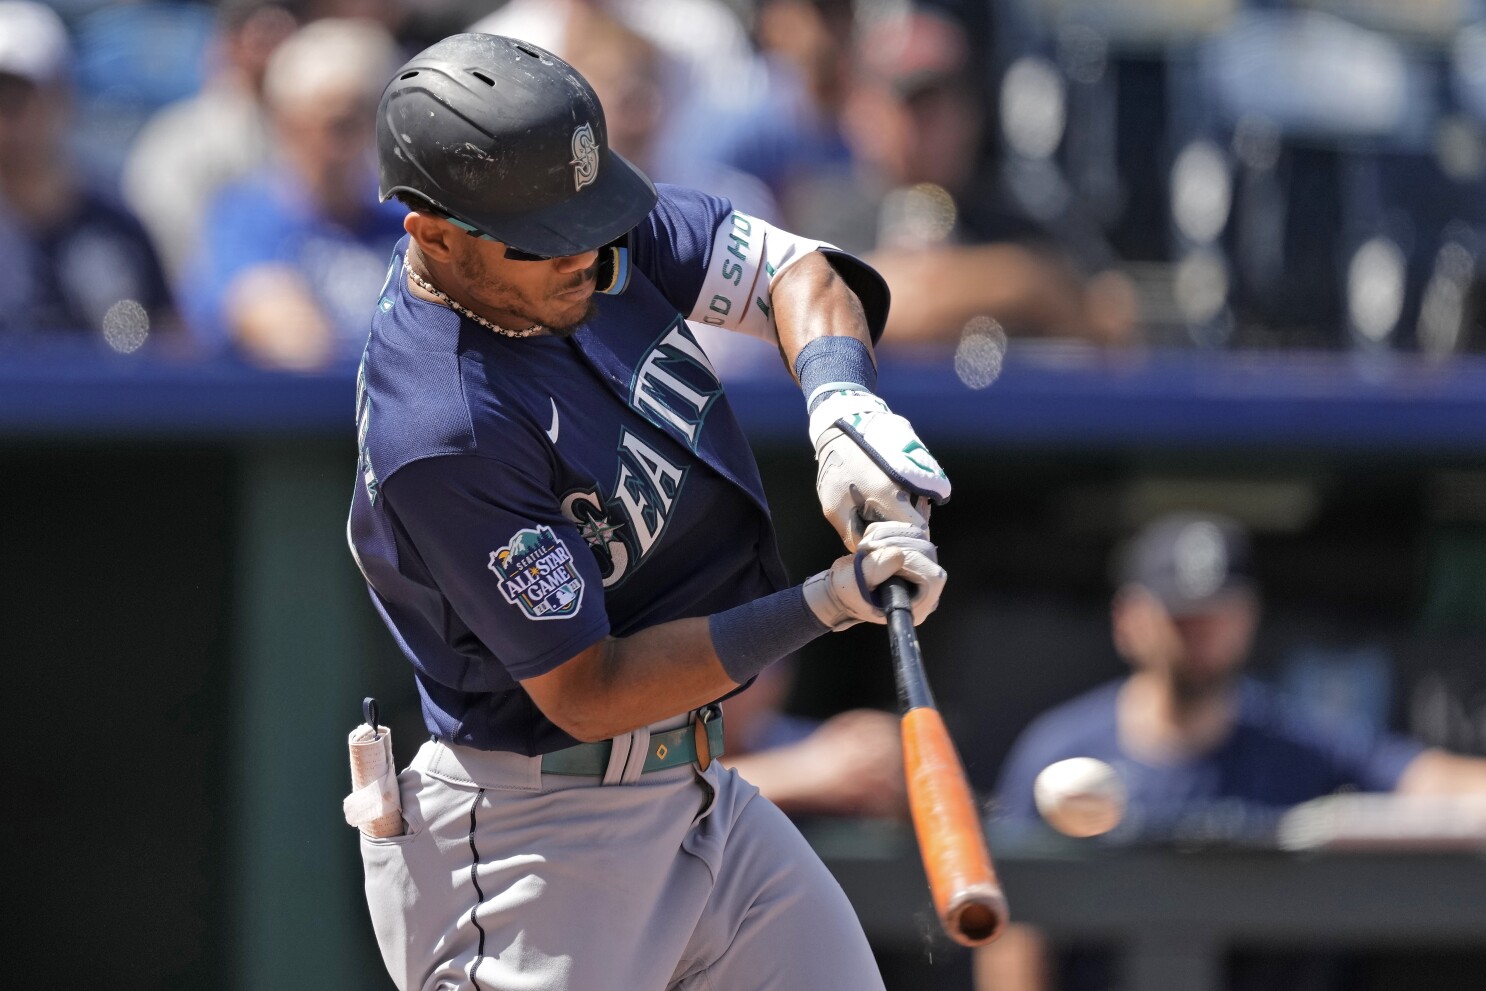 Rodríguez steals home to lead Mariners past Red Sox